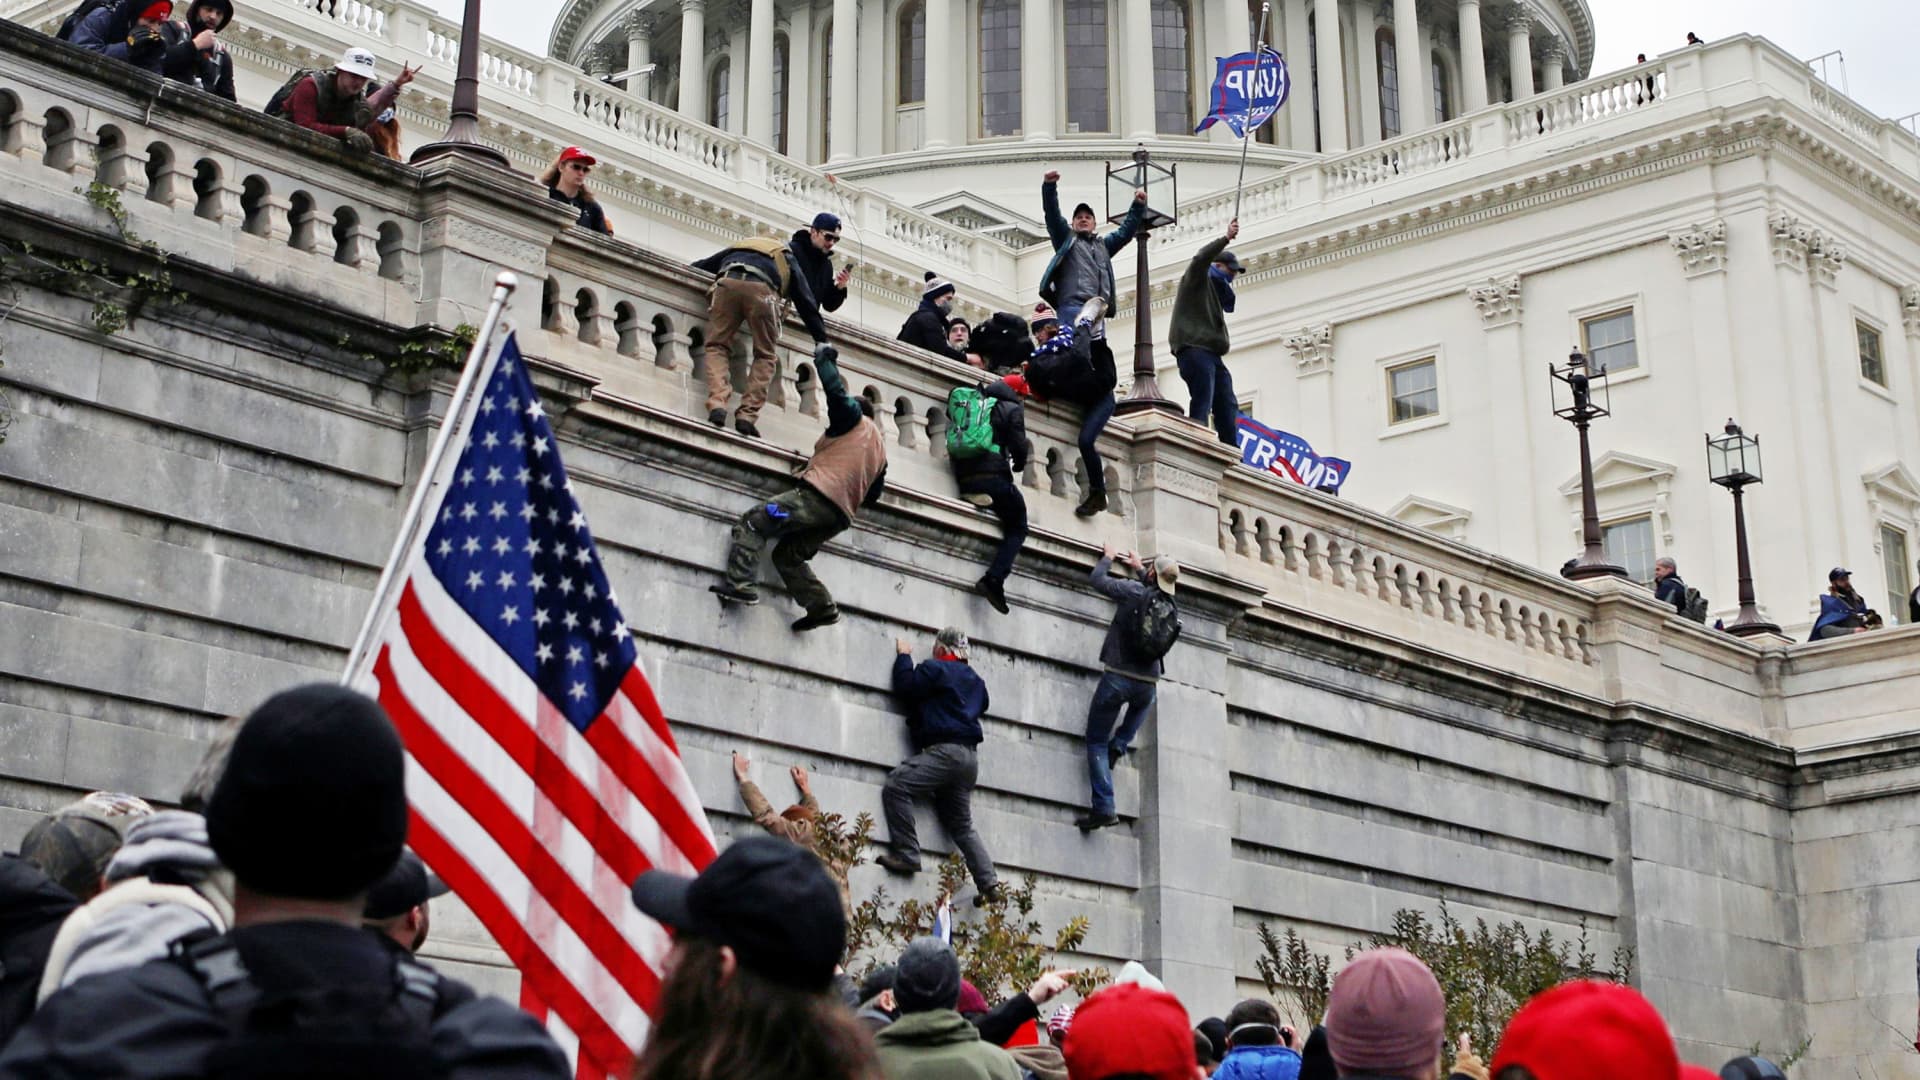 Supporters of U.S. President Donald Trump climb a wall during a protest against the certification of the 2020 presidential election results by the Congress, at the Capitol in Washington, January 6, 2021.